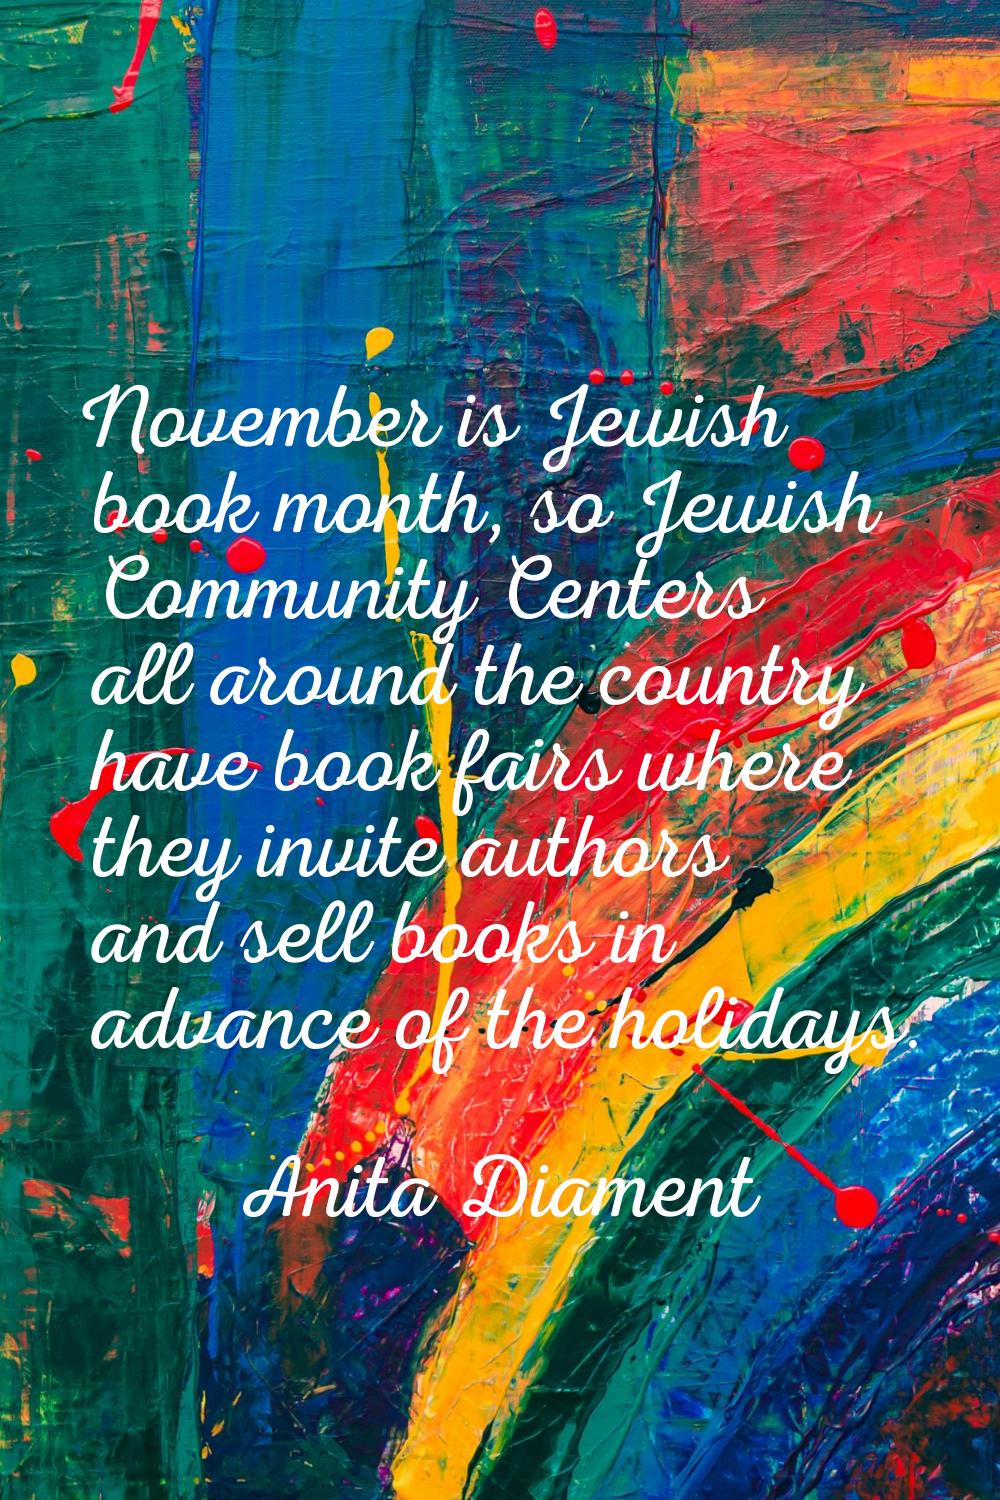 November is Jewish book month, so Jewish Community Centers all around the country have book fairs w